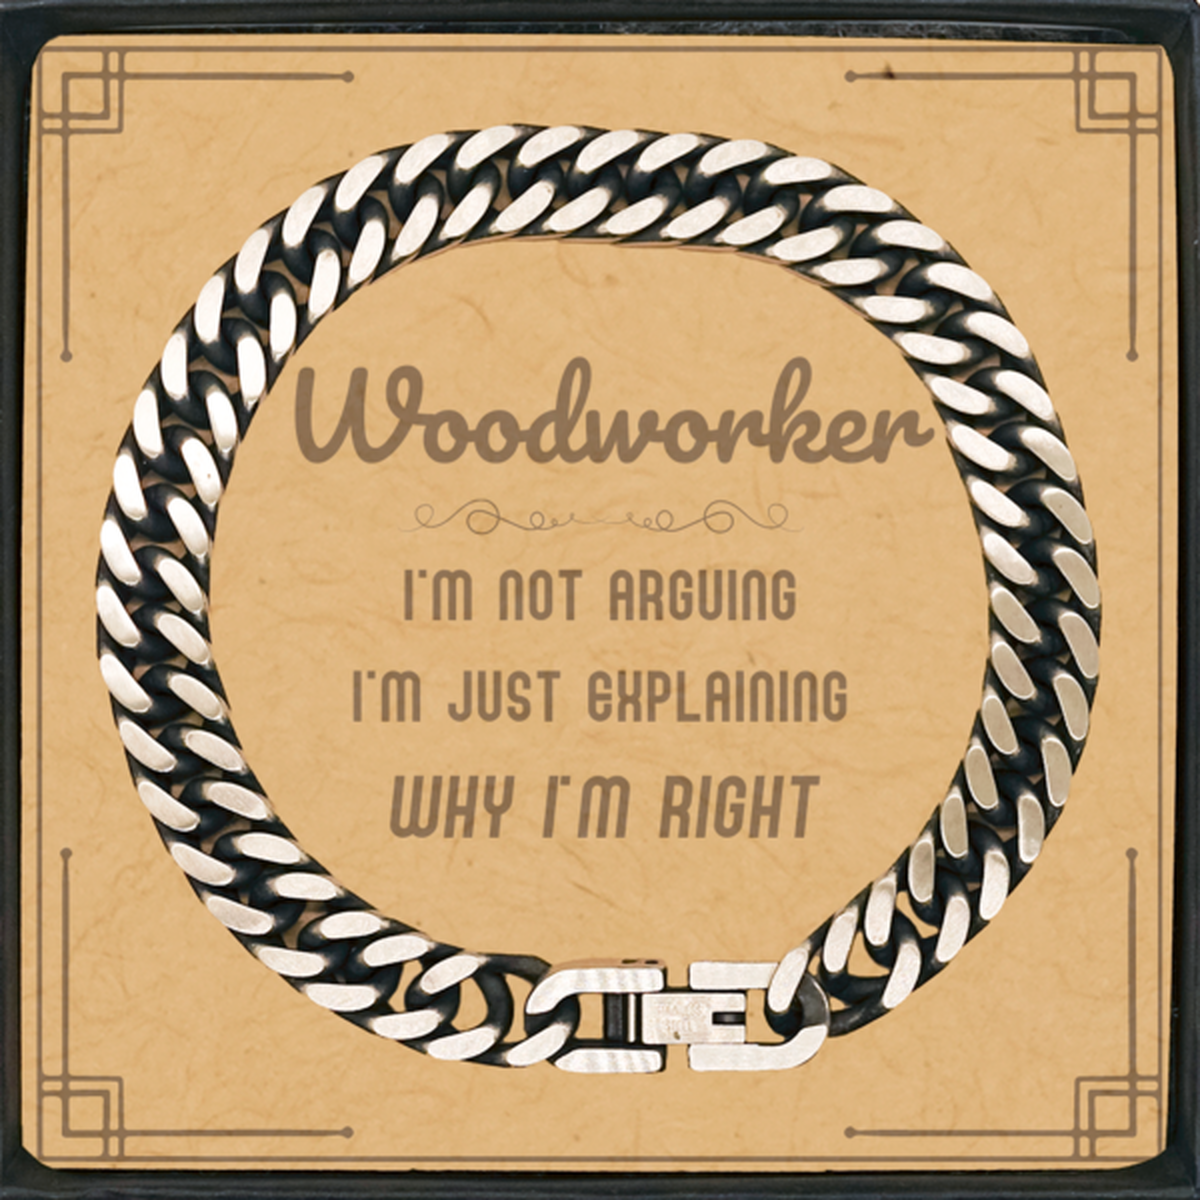 Woodworker I'm not Arguing. I'm Just Explaining Why I'm RIGHT Cuban Link Chain Bracelet, Funny Saying Quote Woodworker Gifts For Woodworker Message Card Graduation Birthday Christmas Gifts for Men Women Coworker